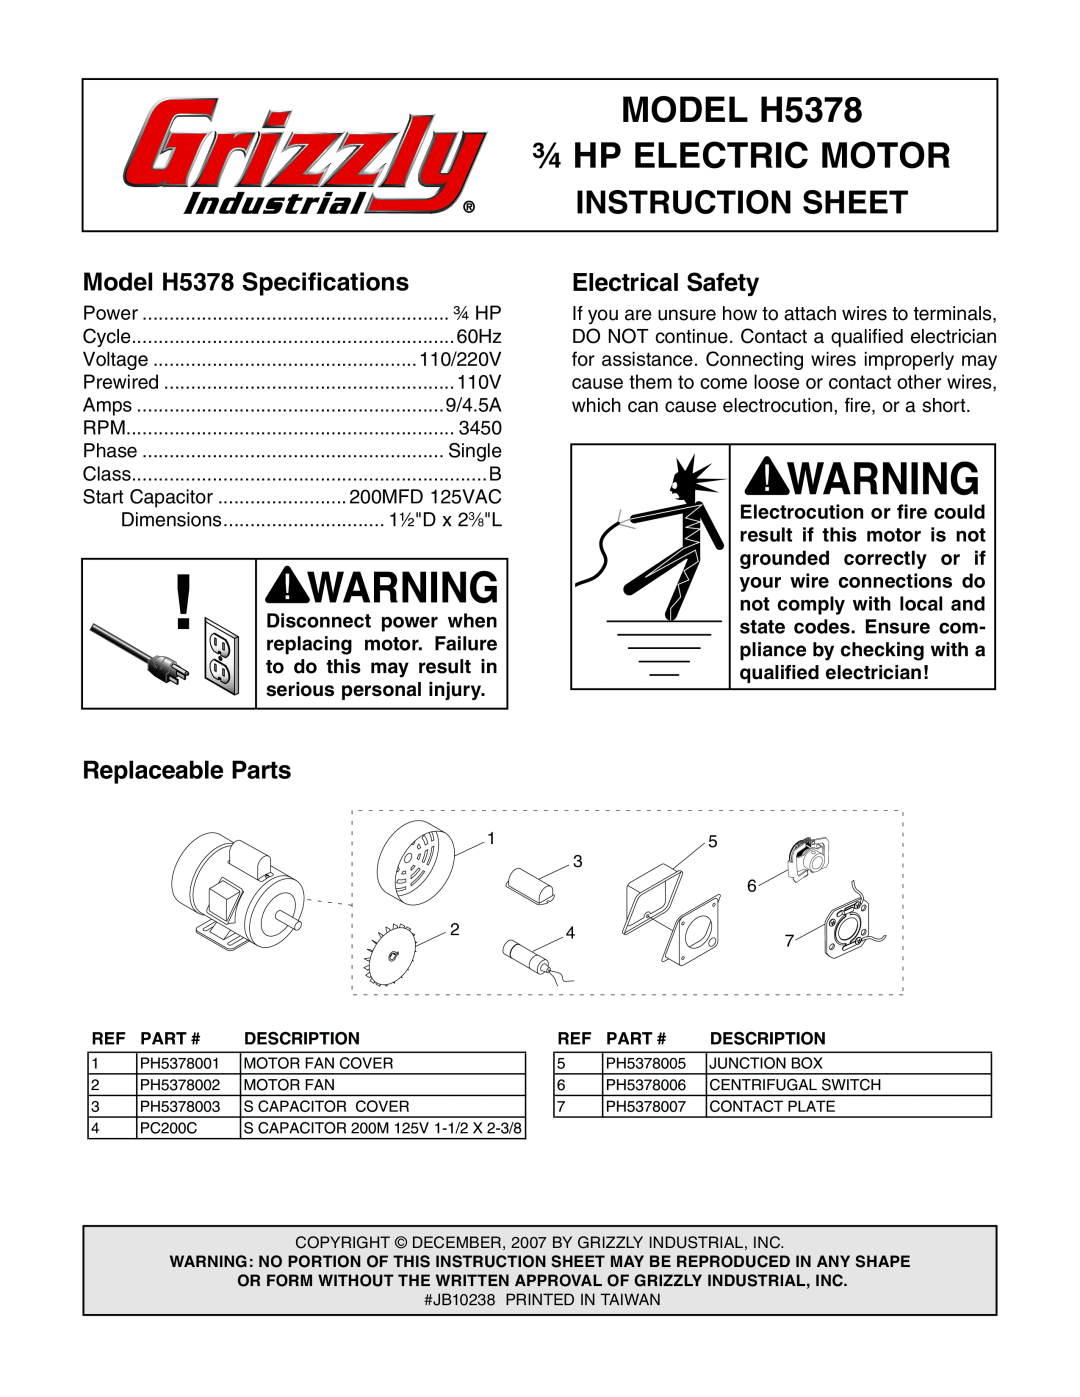 Grizzly instruction sheet MODEL H5378 ¾ HP ELECTRIC MOTOR, Instruction Sheet, Model H5378 Specifications 